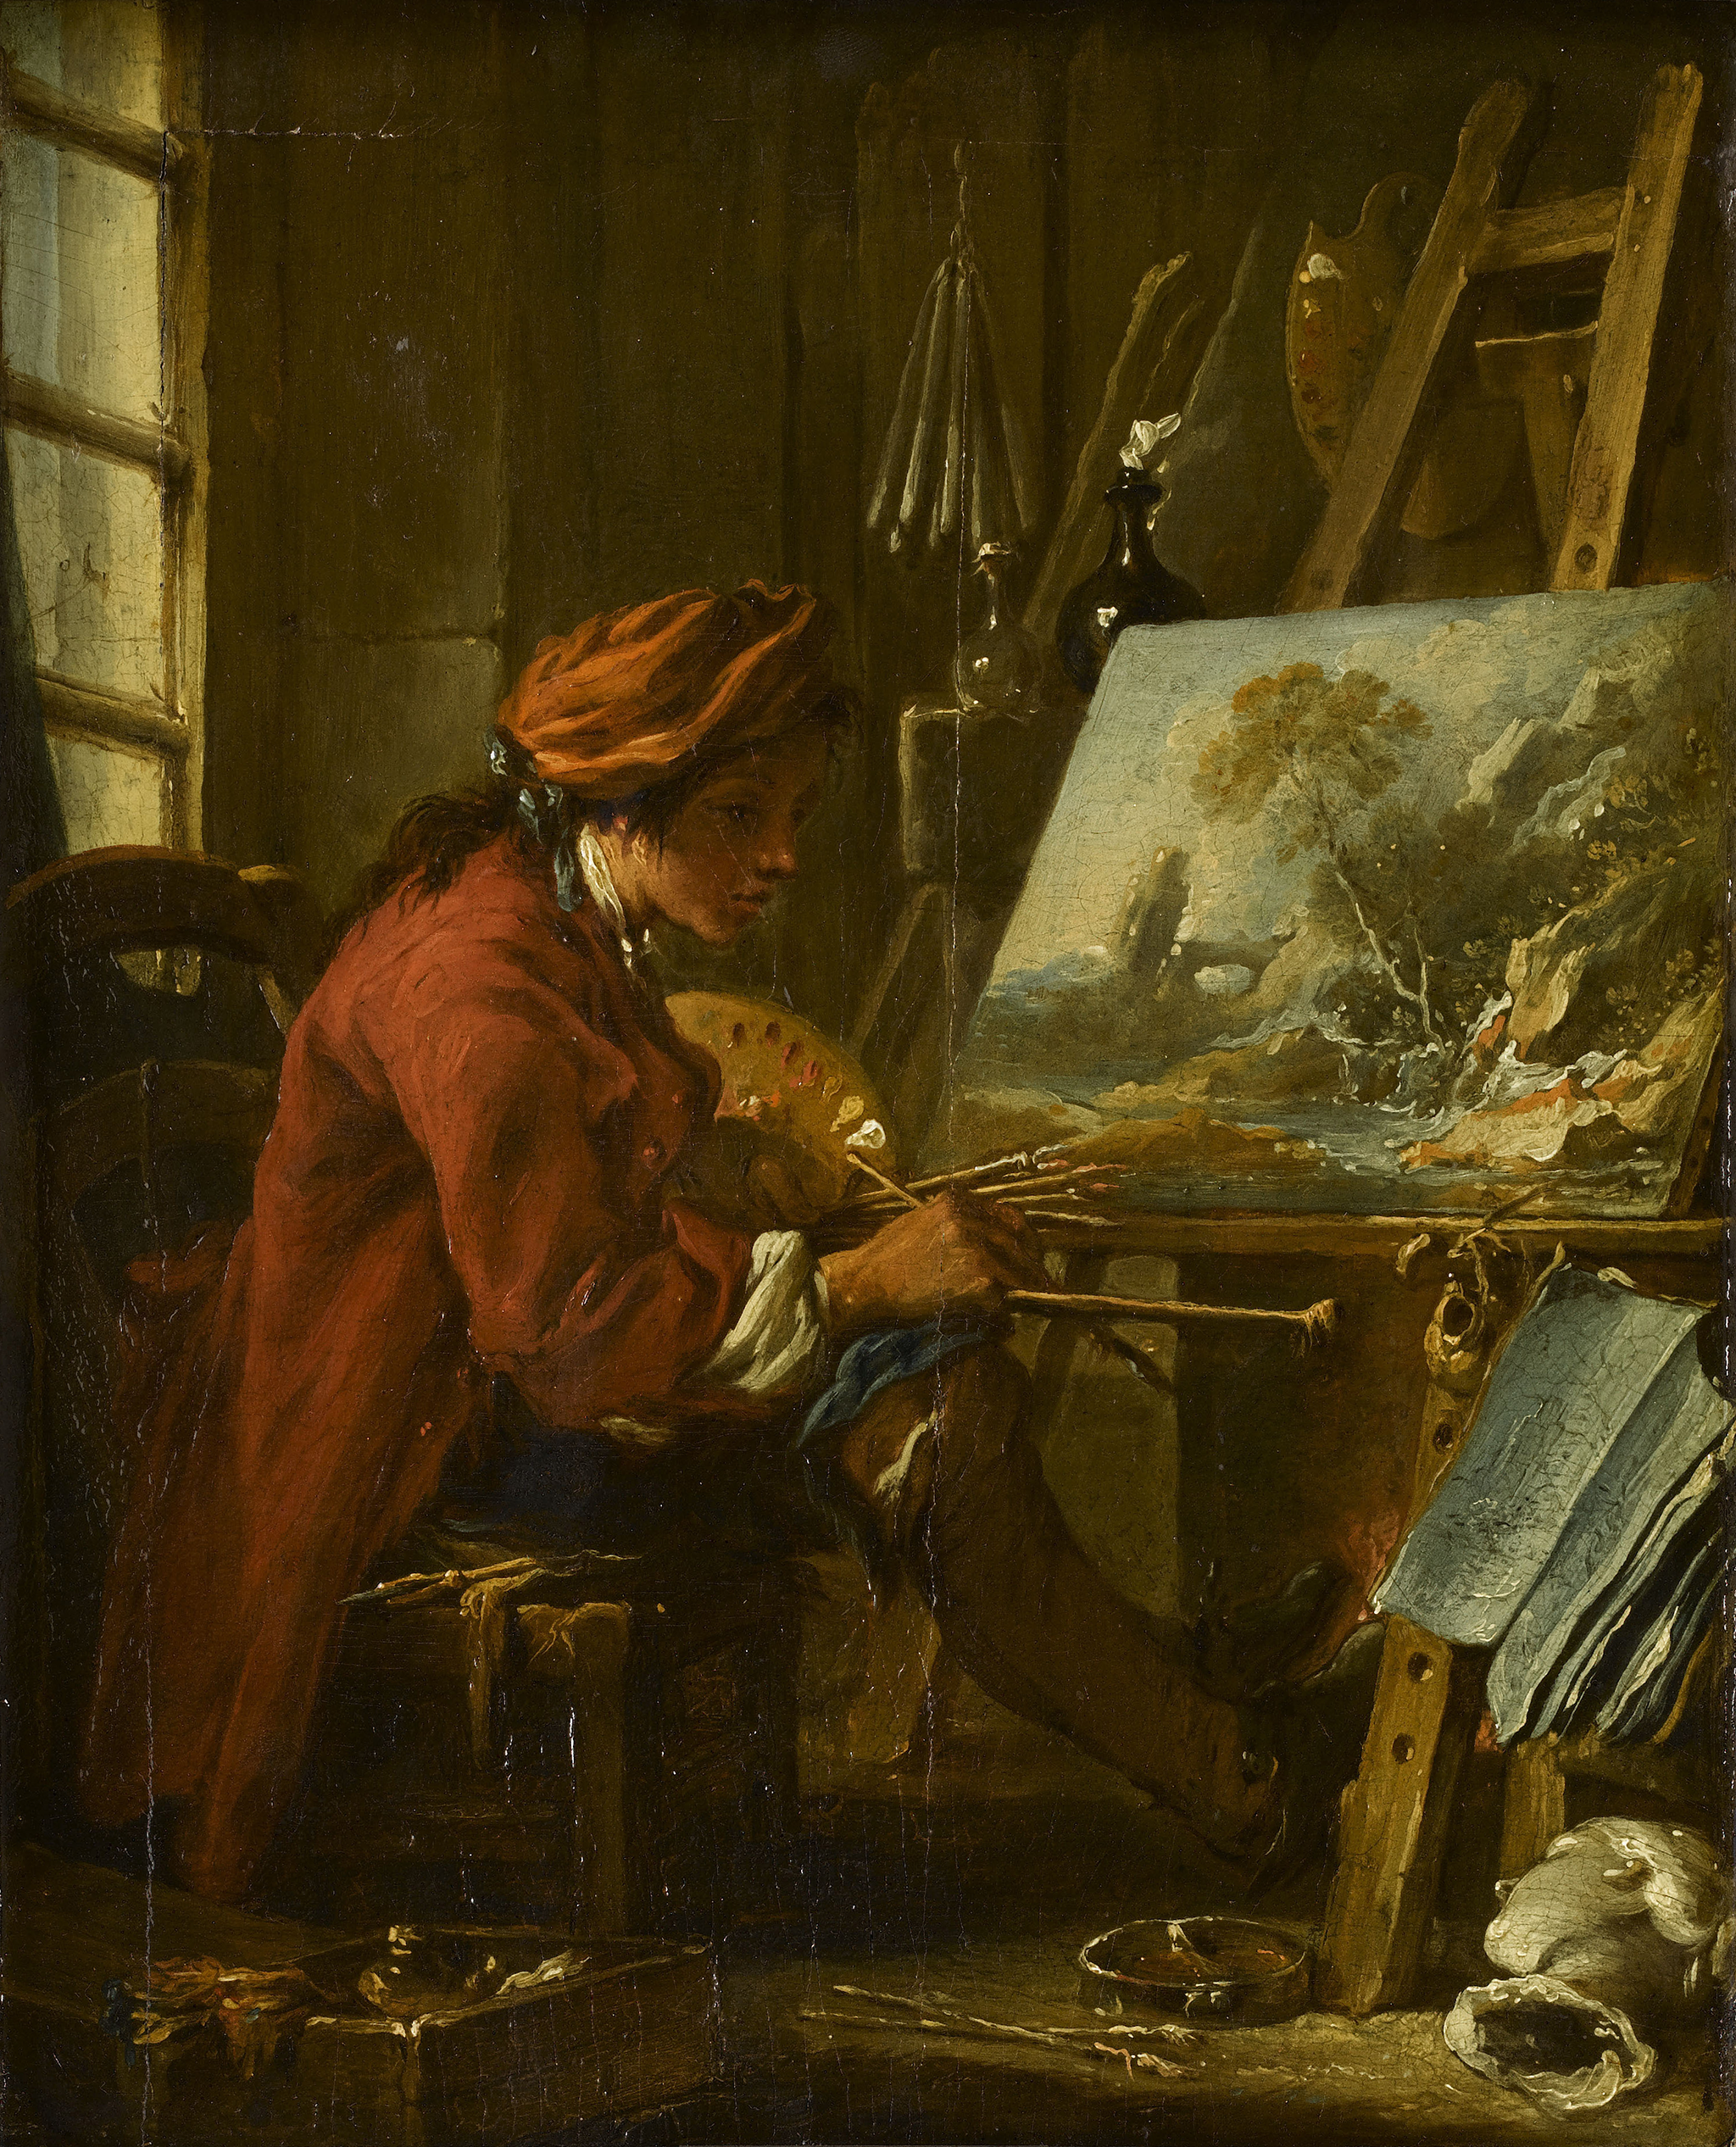 A painting of an artist sitting in a wooden chair while painting on a canvas. The artist wears a large red coat and a variety of paint brushes in his right hand. He faces a painting of a rocky mountain surrounded by a few trees. The background consists of a multiple tools and assortments hanging on the wooden wall.